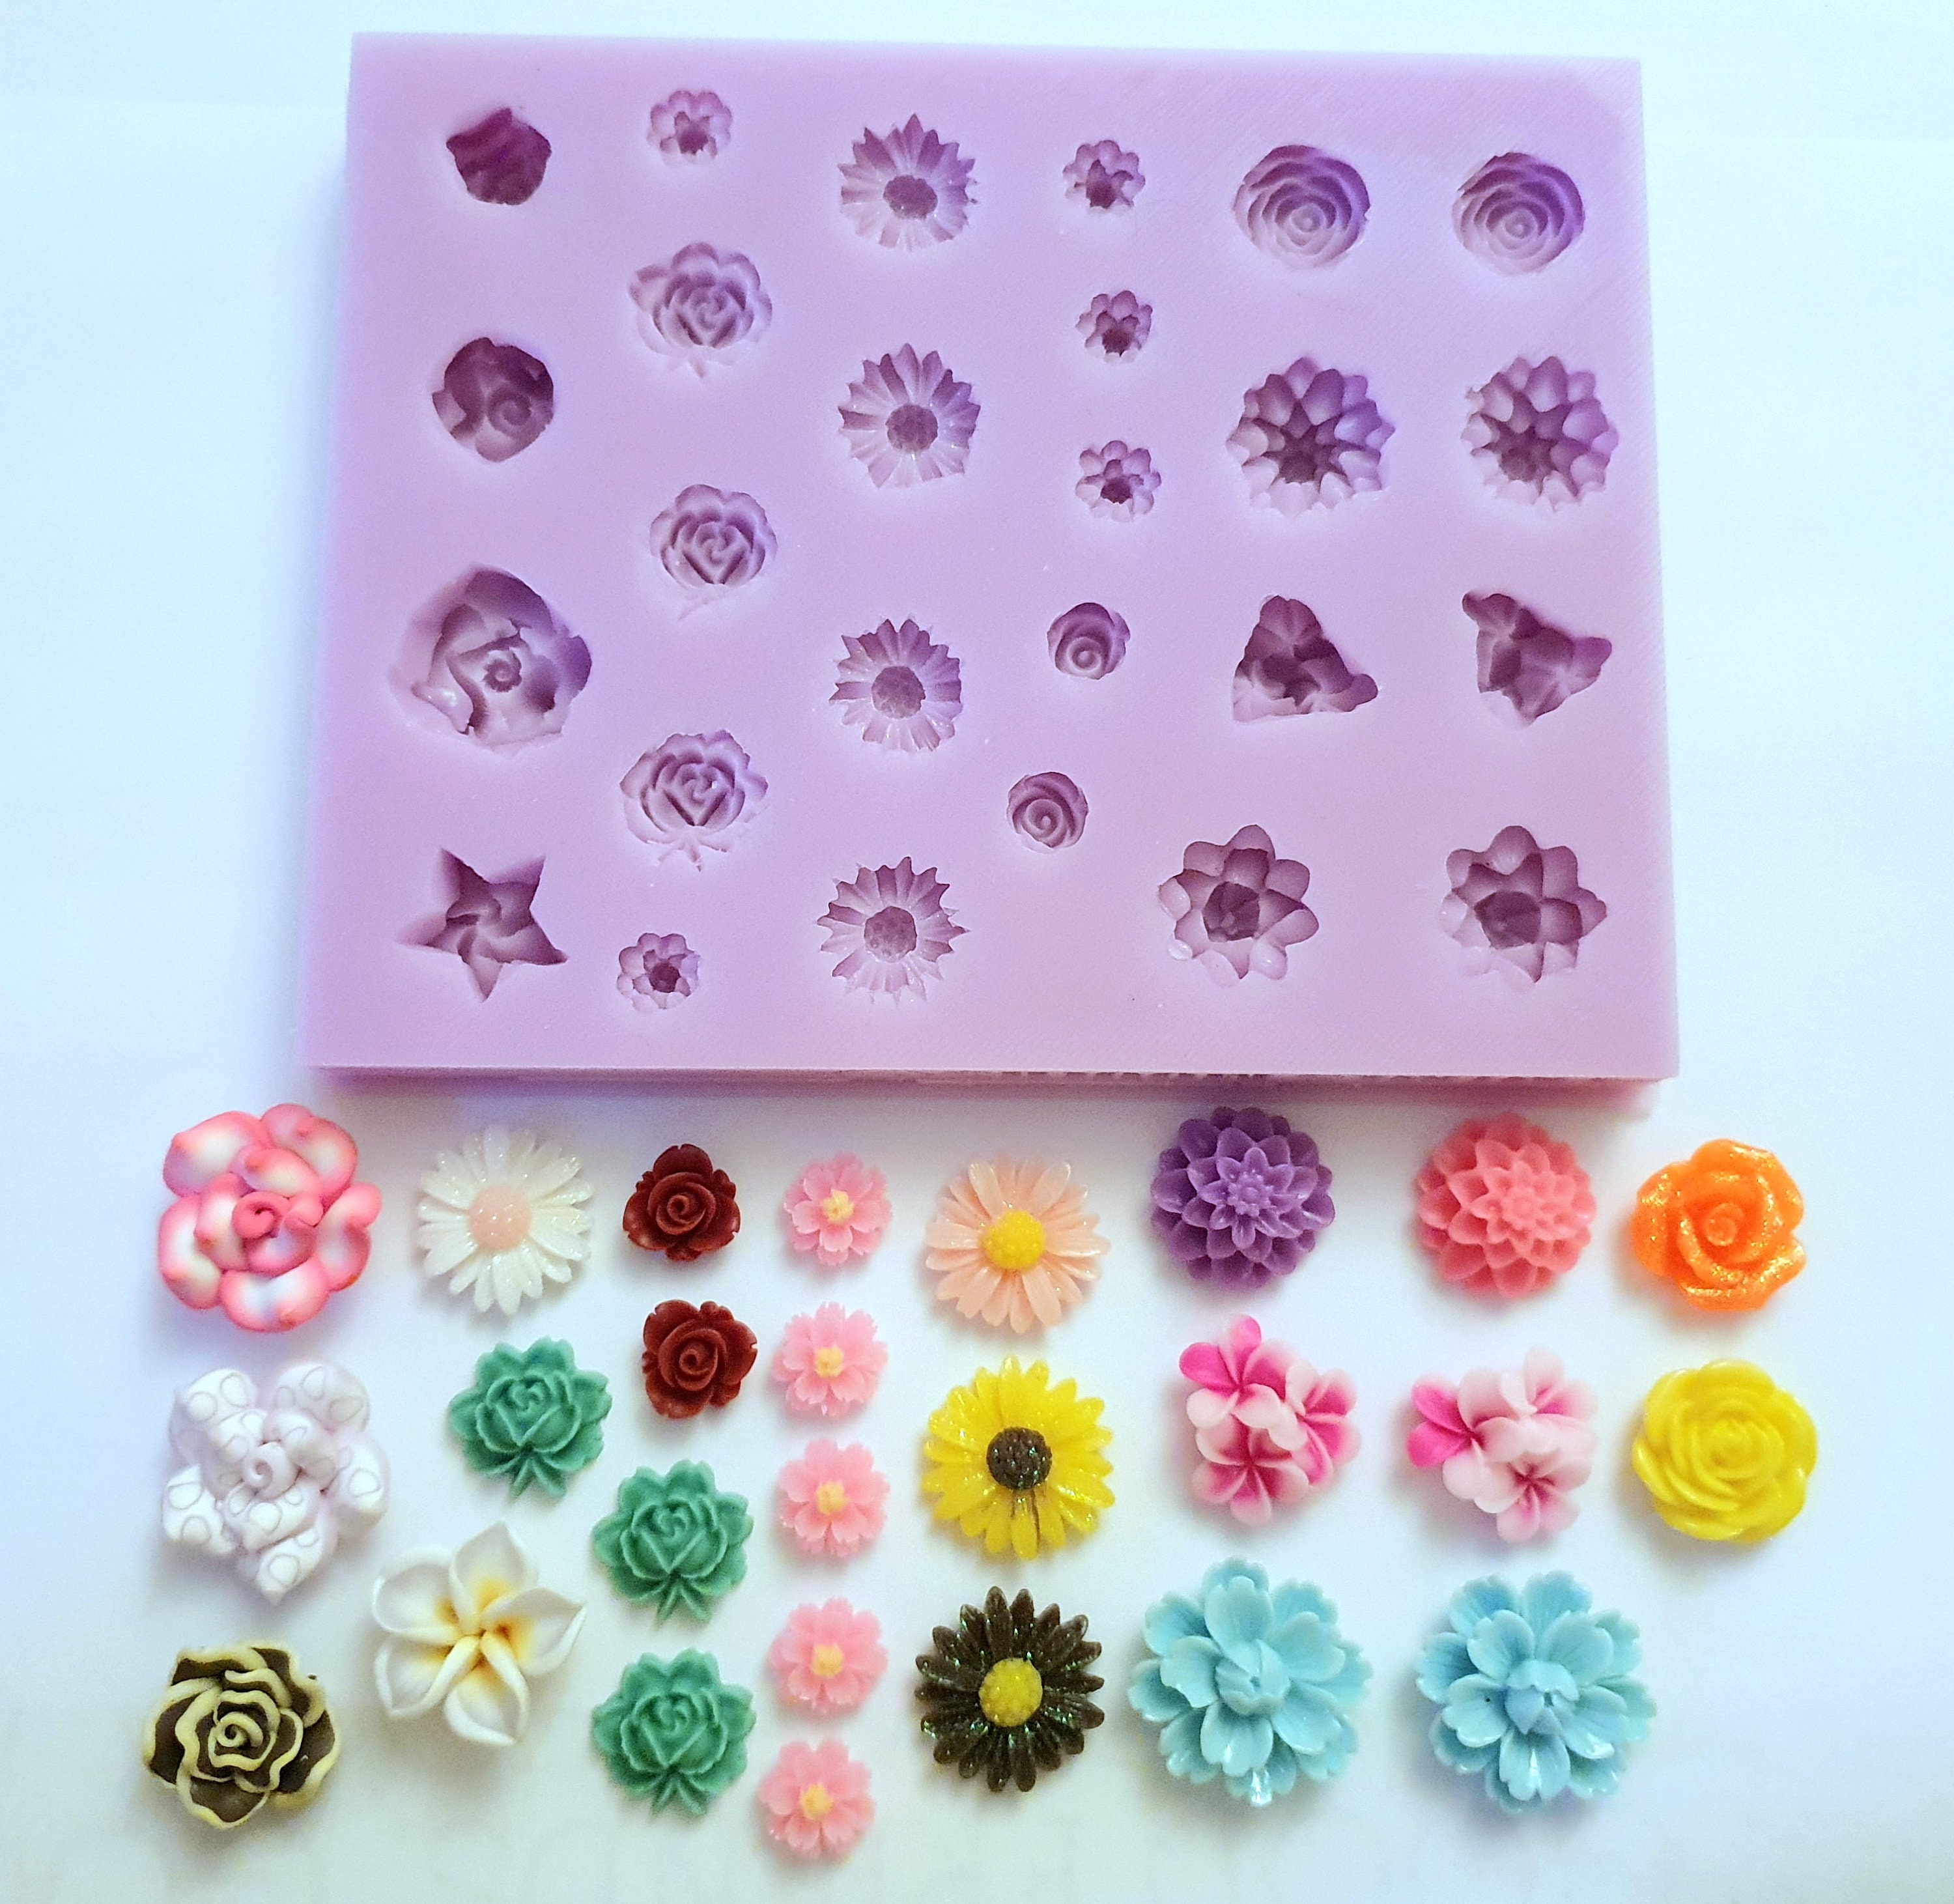 Floral Border Silicone Mold Flower Bouquet Pattern for Cake Decorating